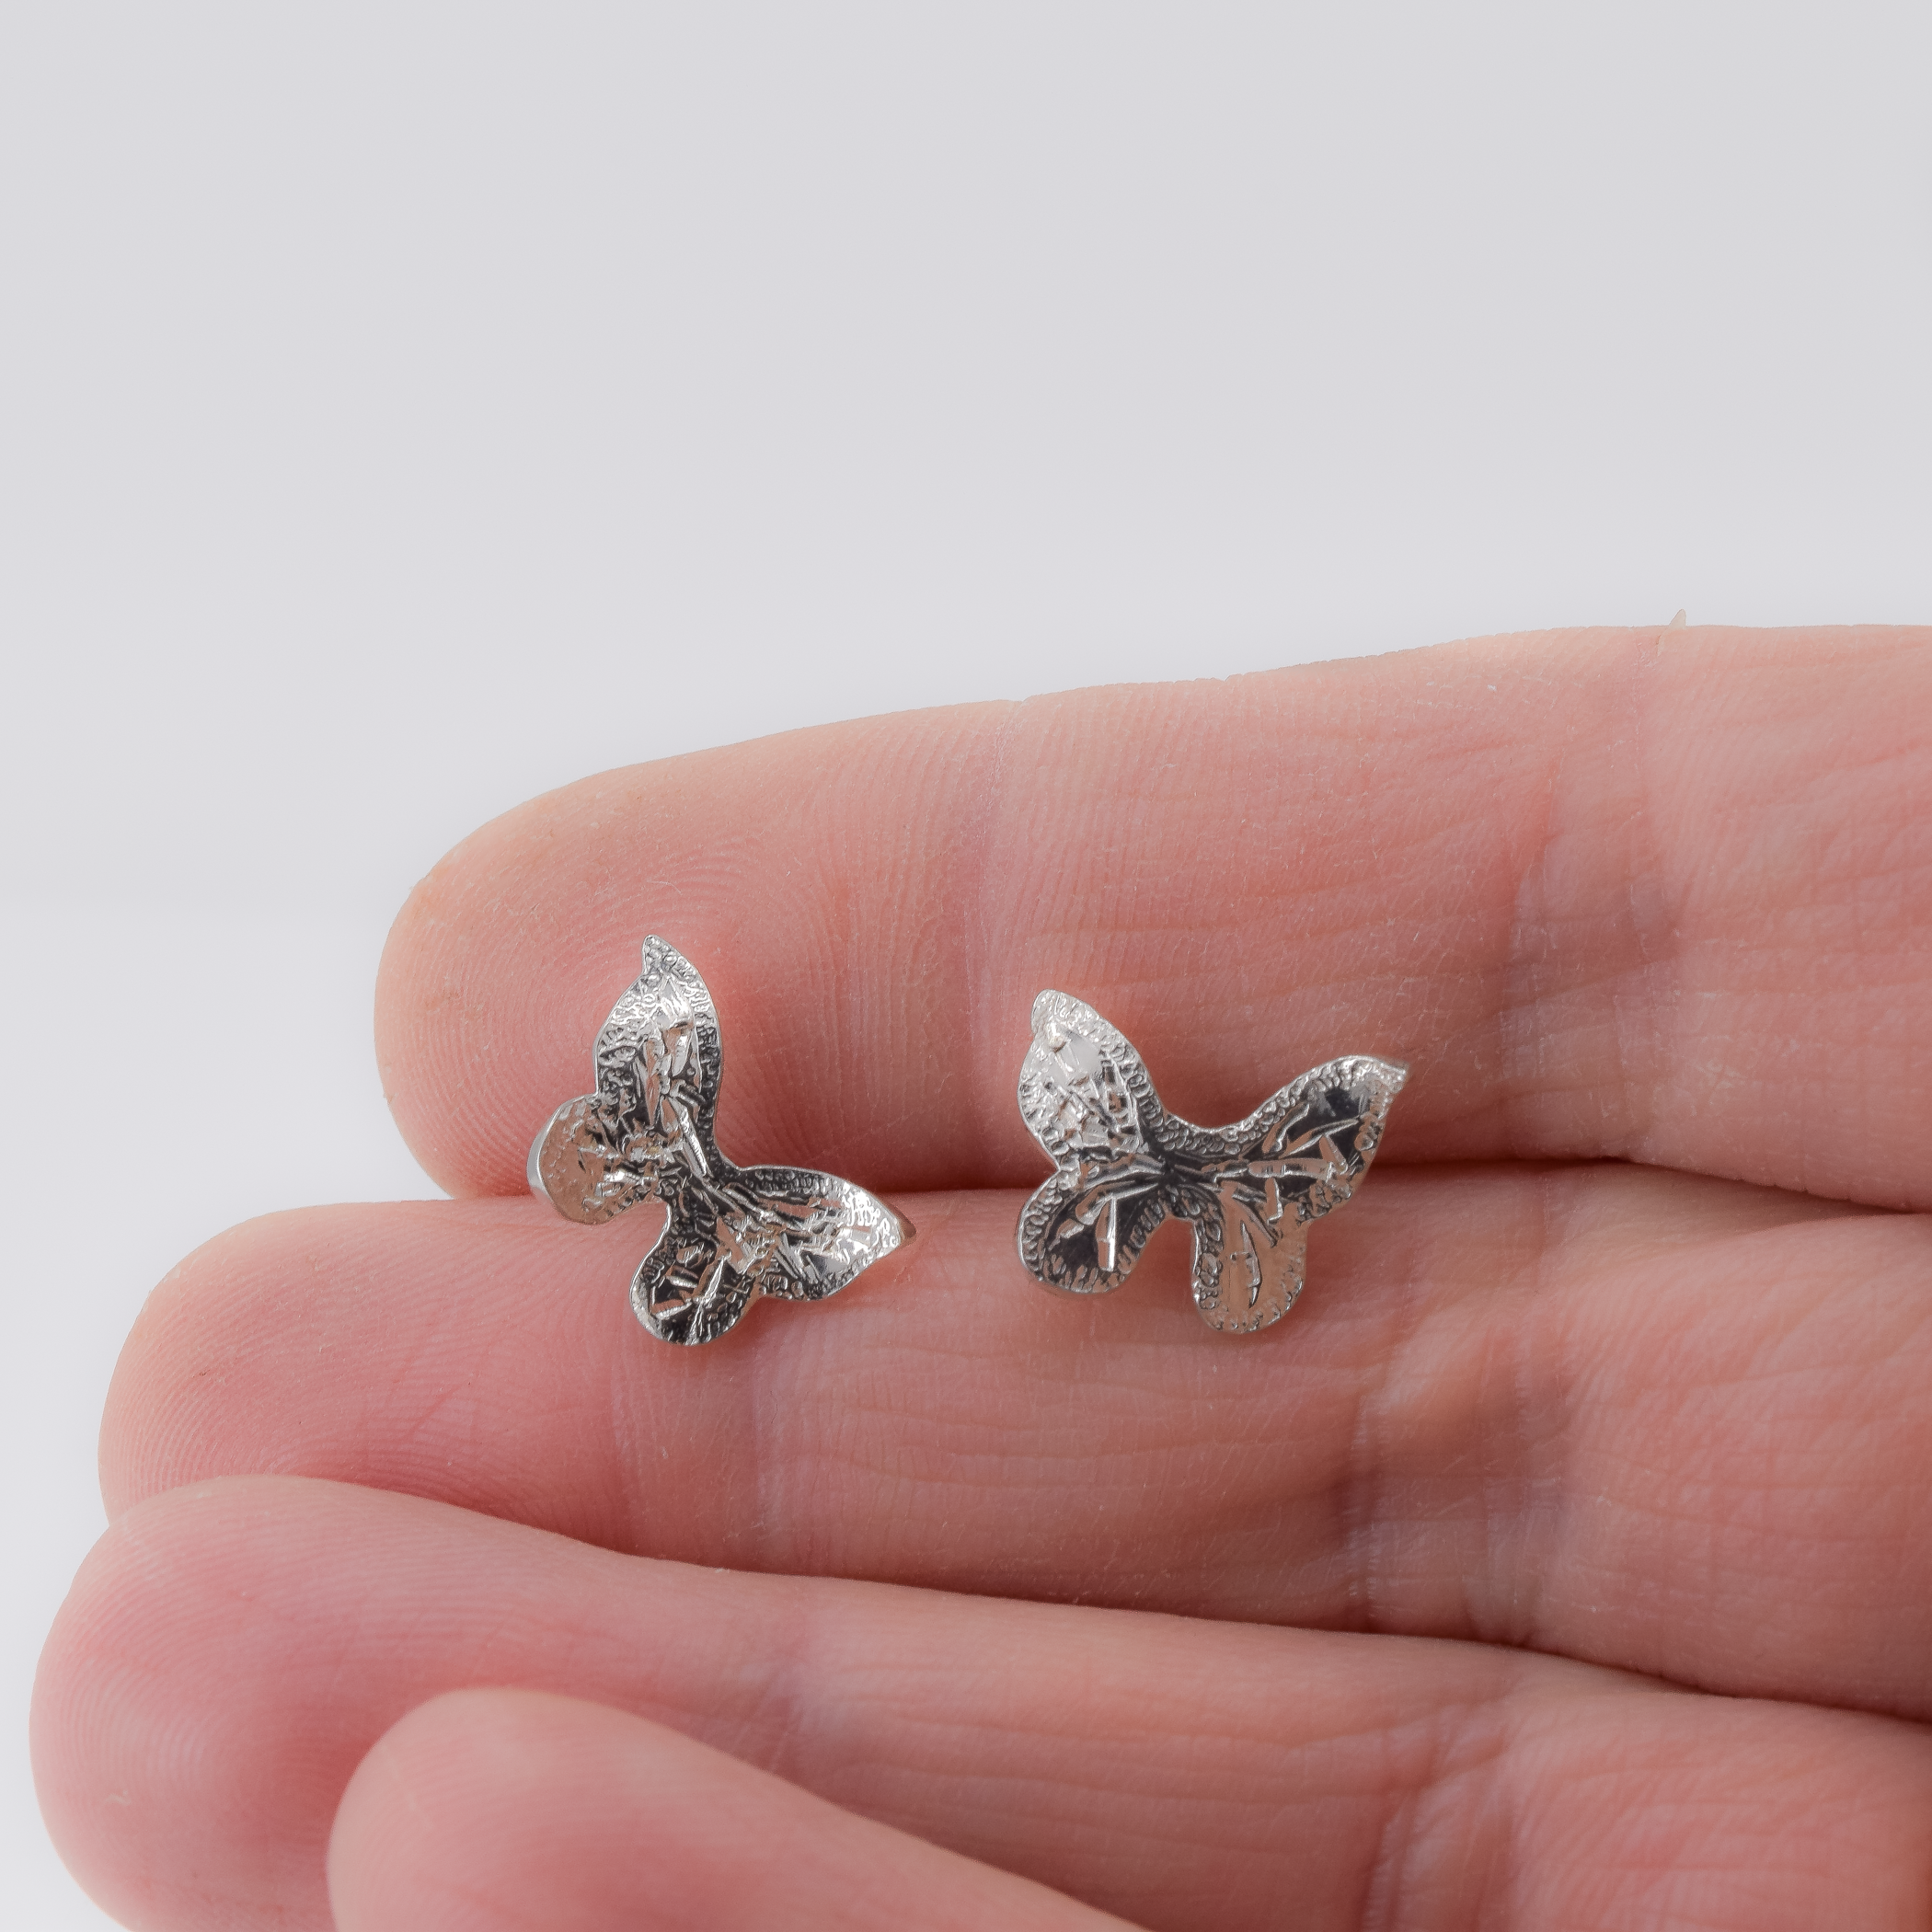 Curved hand engraved butterfly stud earrings shown in hand for scale